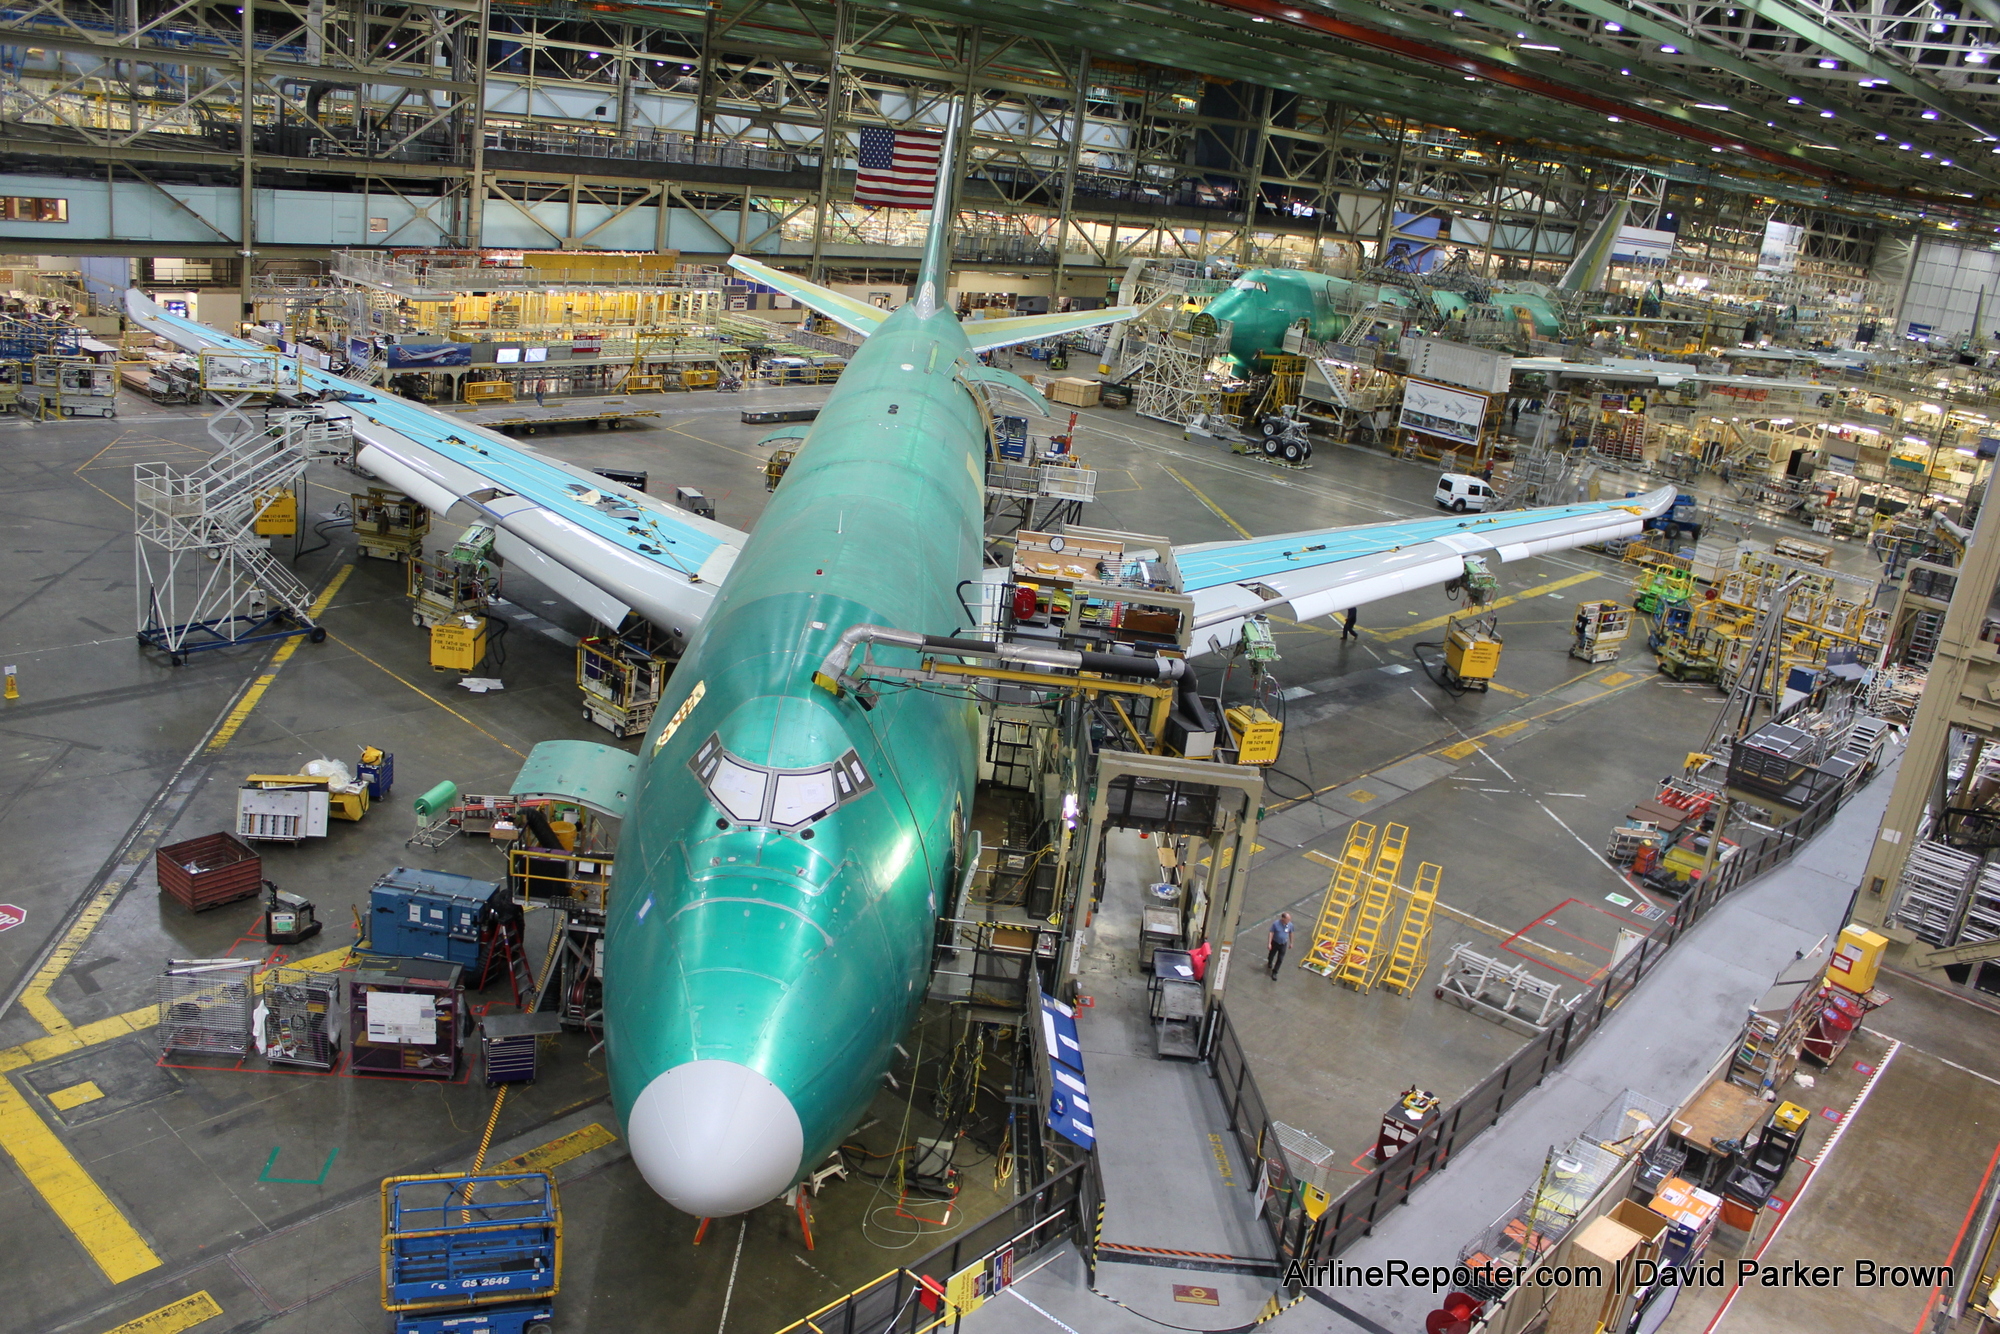 Factory: Tour of Where Boeing 747s are Born - AirlineReporter : AirlineReporter